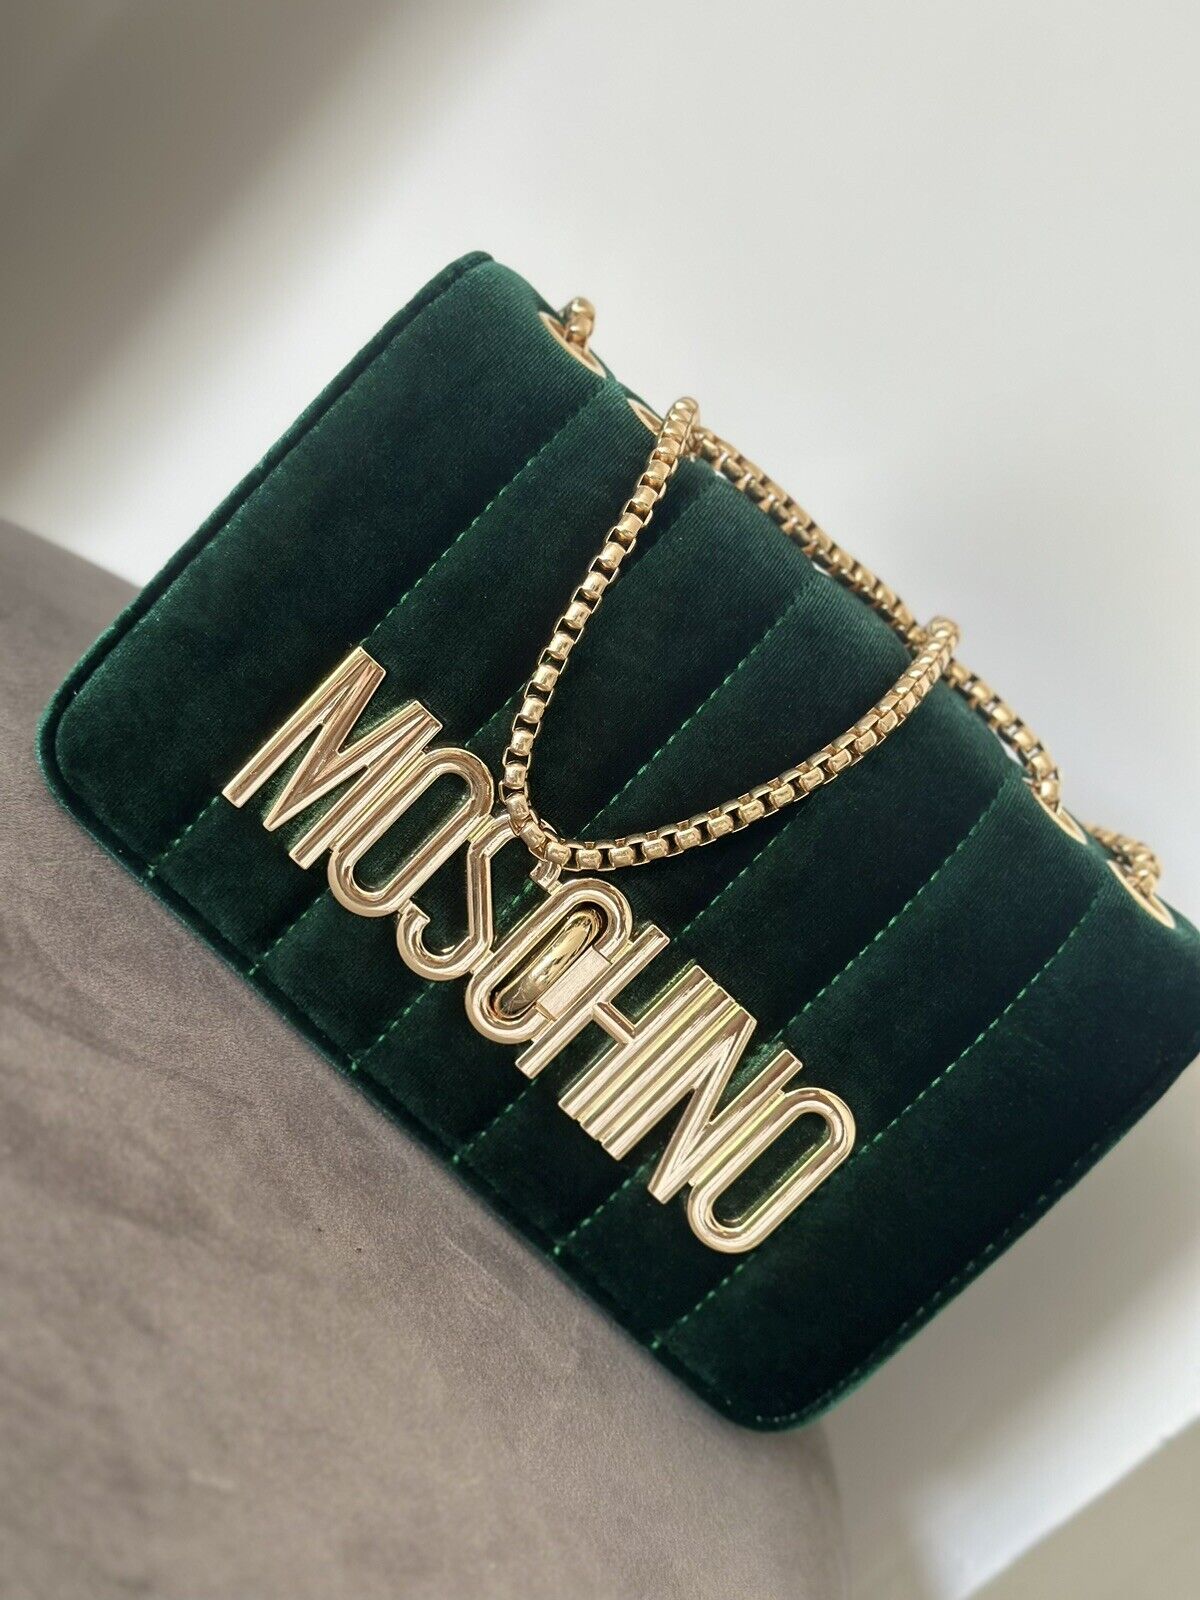 Moschino Green Purse Bag shoulder with gold logo